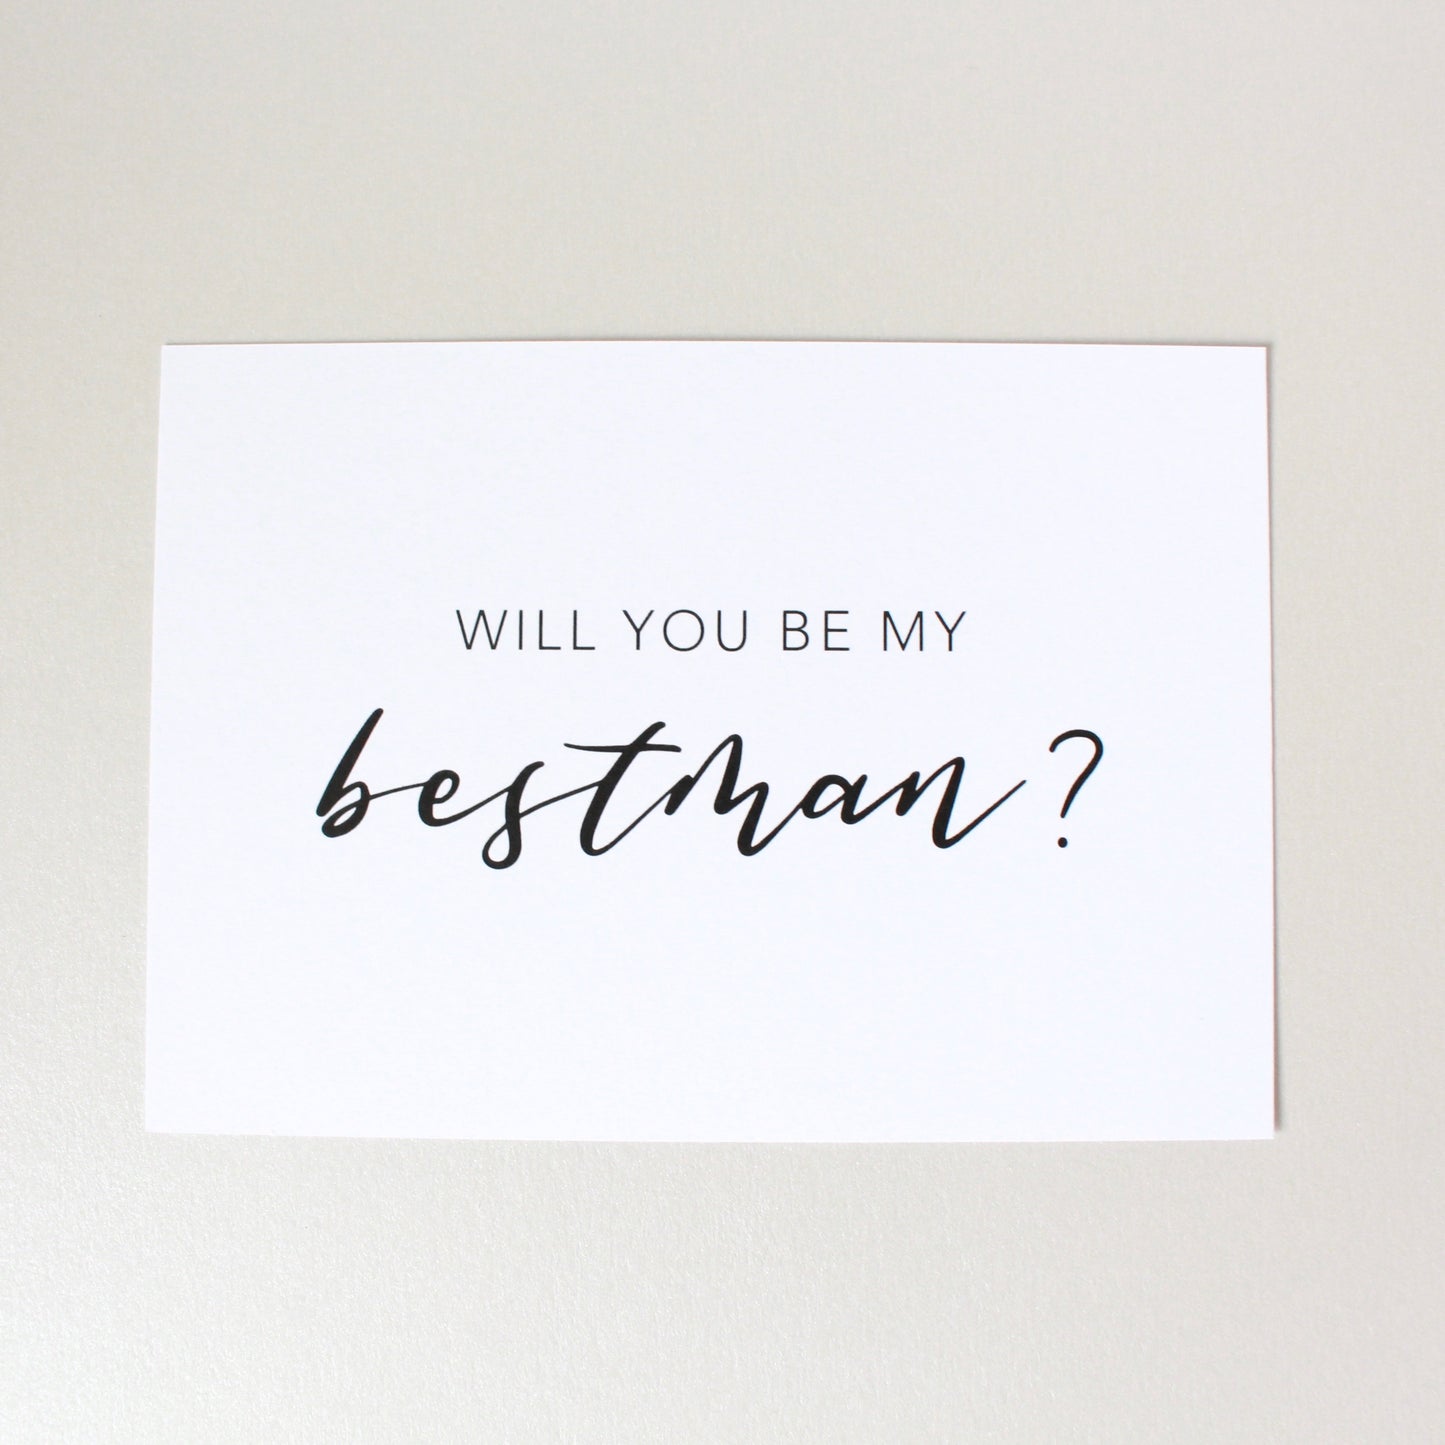 Will You Be My Bestman? Card